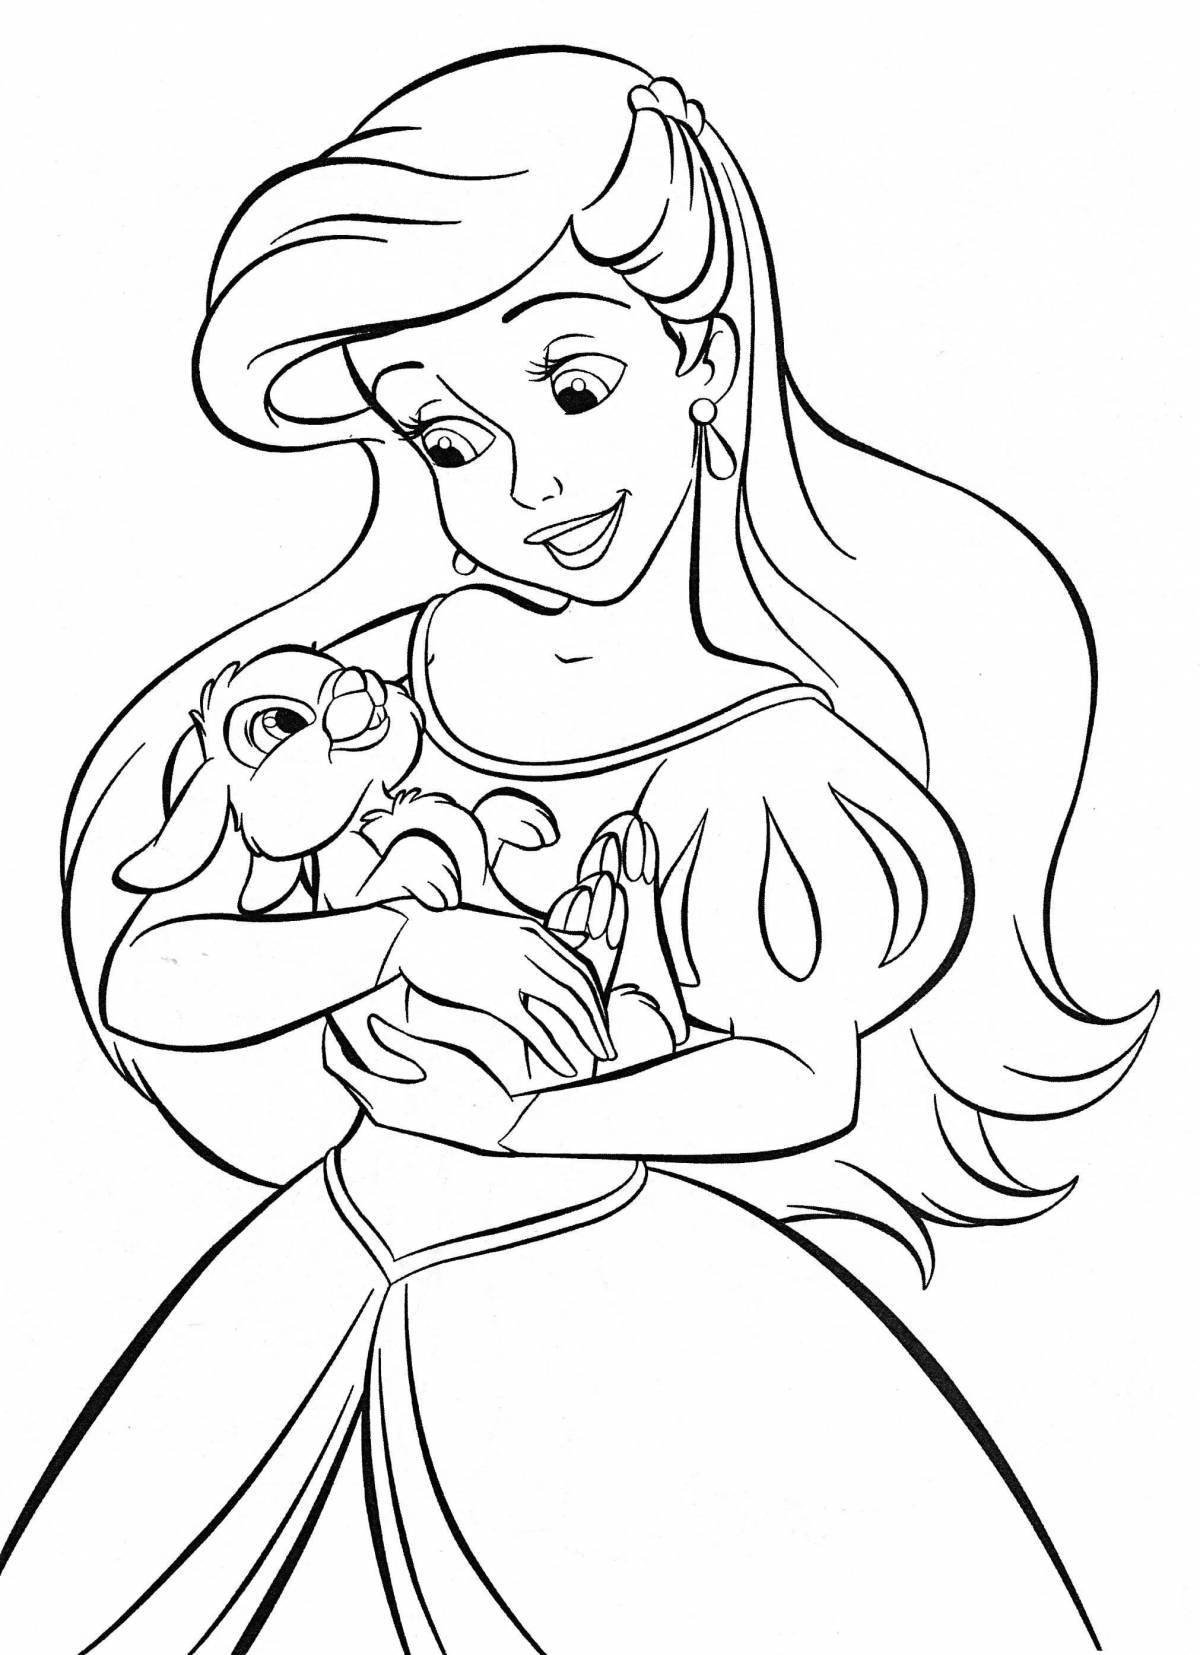 Perfect coloring book for drawing a princess